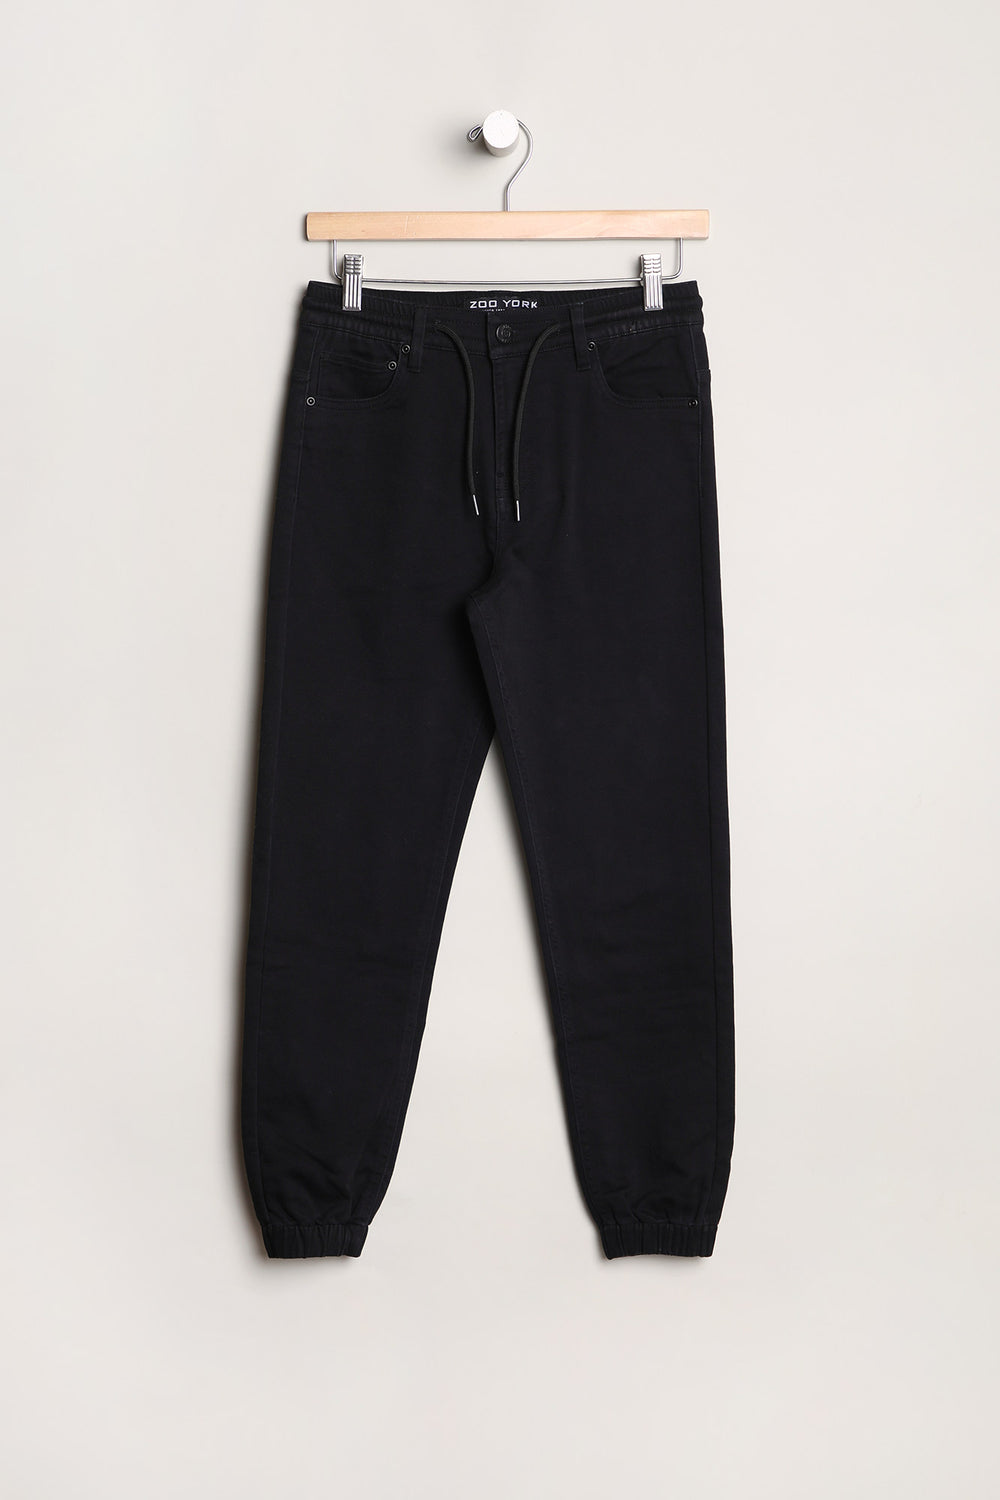 Zoo York Youth Relaxed Soft Denim Jogger Zoo York Youth Relaxed Soft Denim Jogger